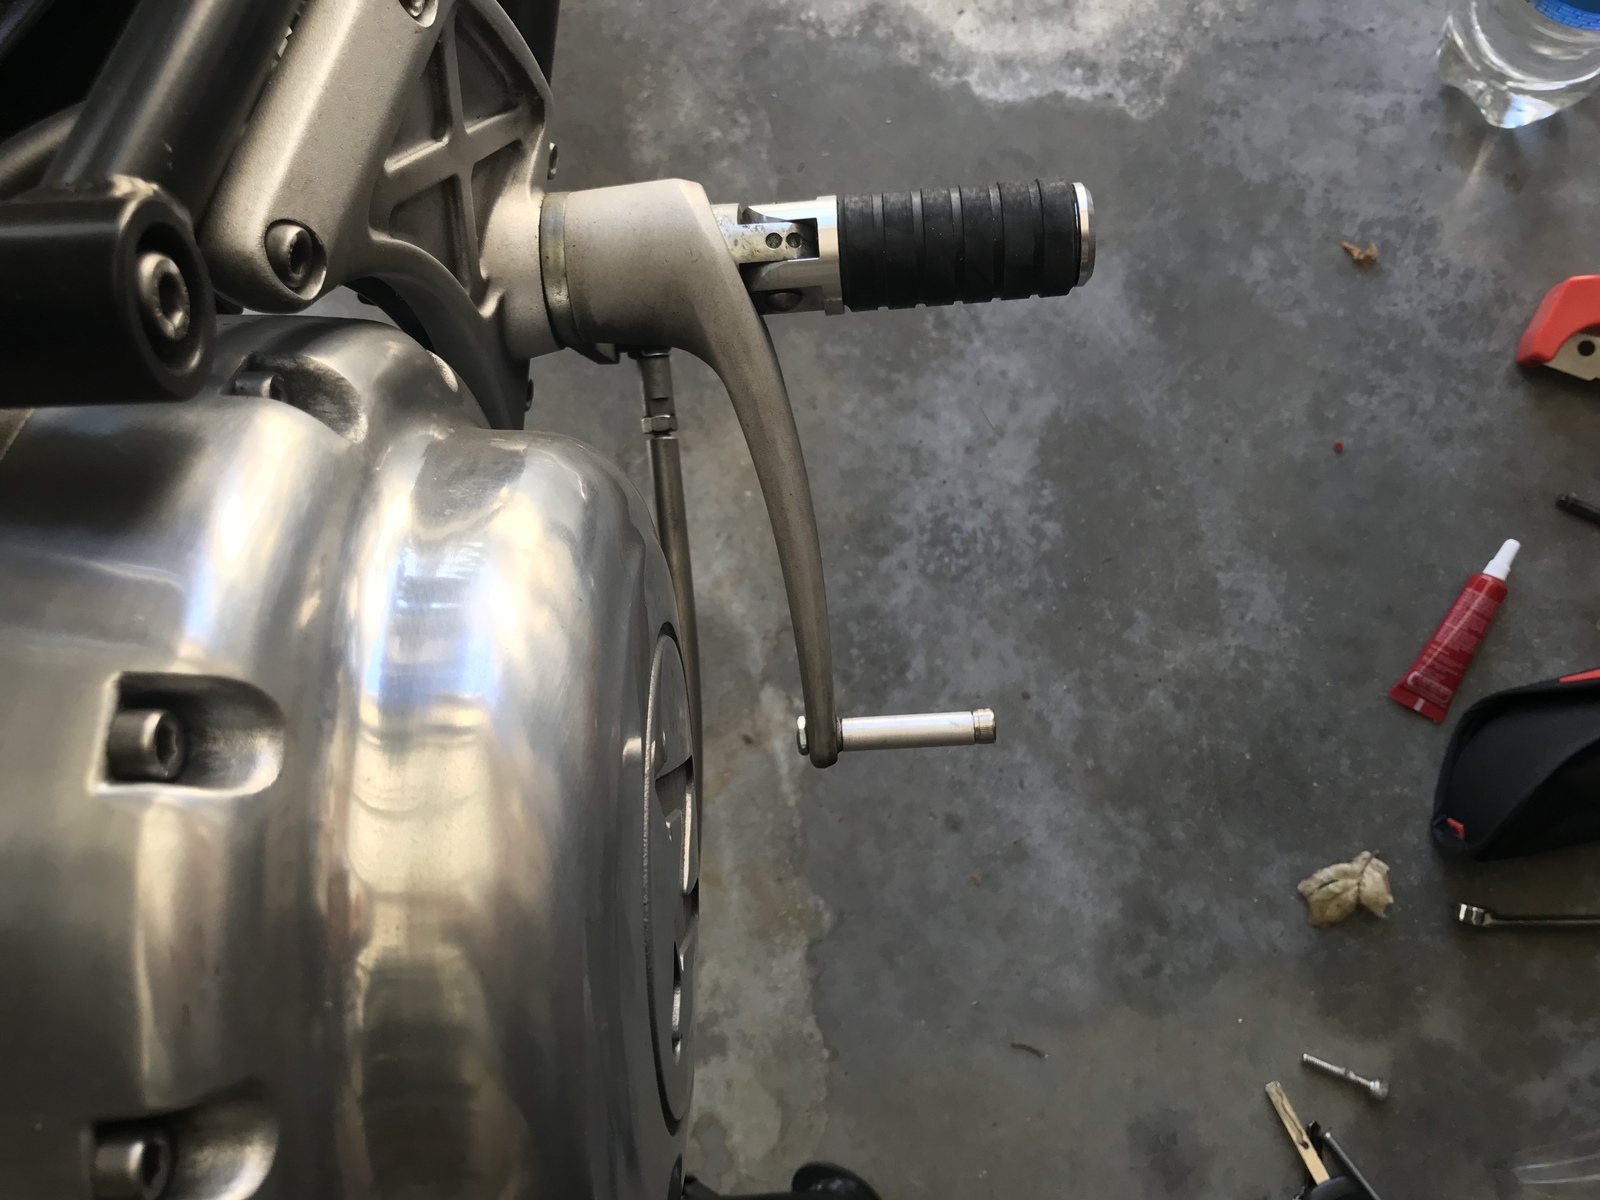 Shift lever fell off while down shifting.